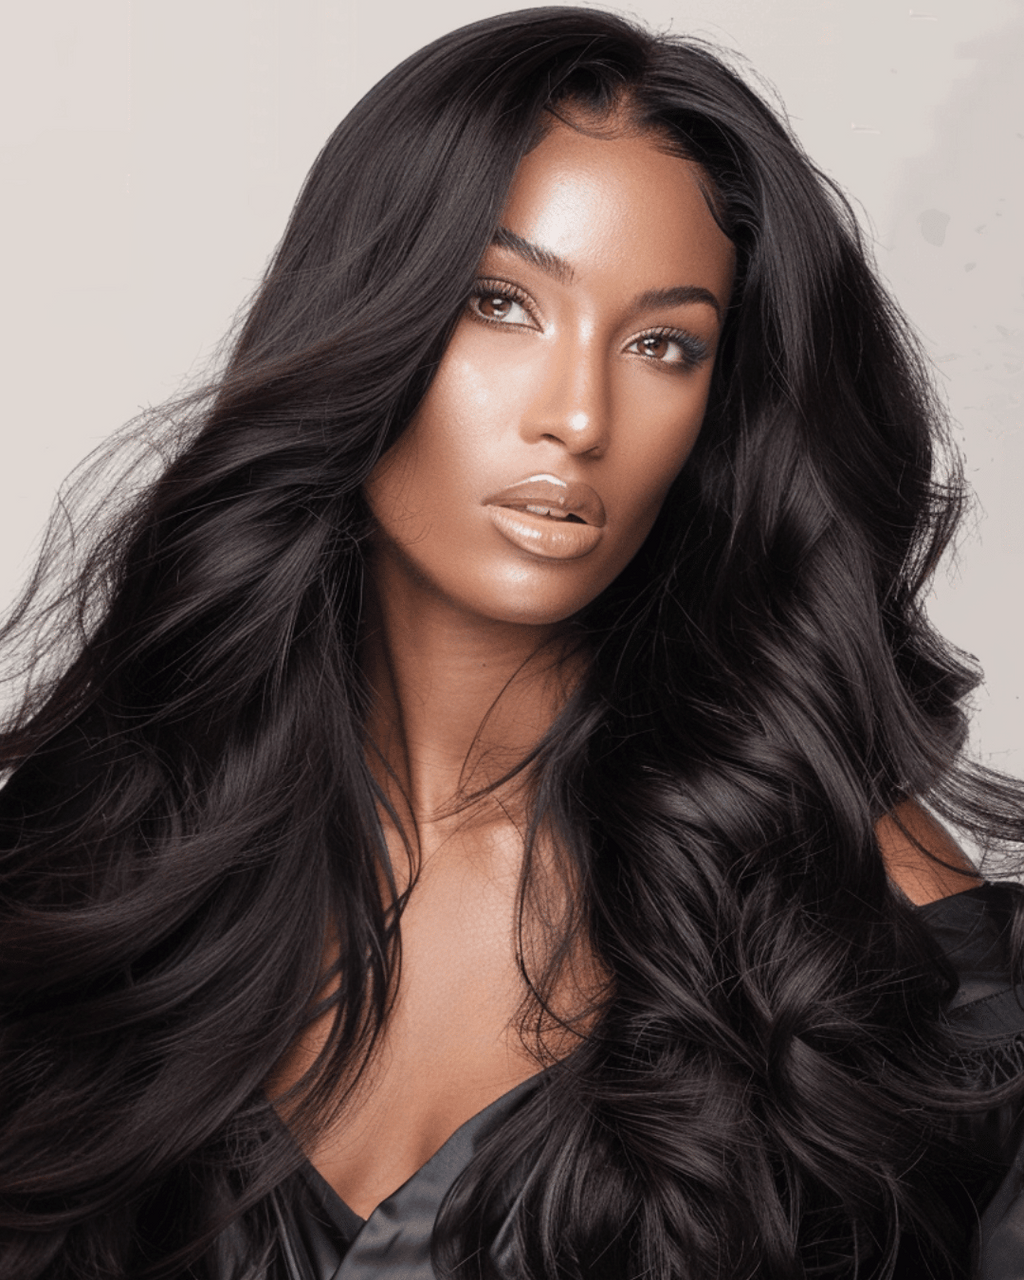 A model with deep skin tone showcasing a luxurious, long, flowing black wig with soft waves. The hair parts in the middle, framing the face elegantly, and the waves add volume and texture, creating a glamorous and sophisticated style